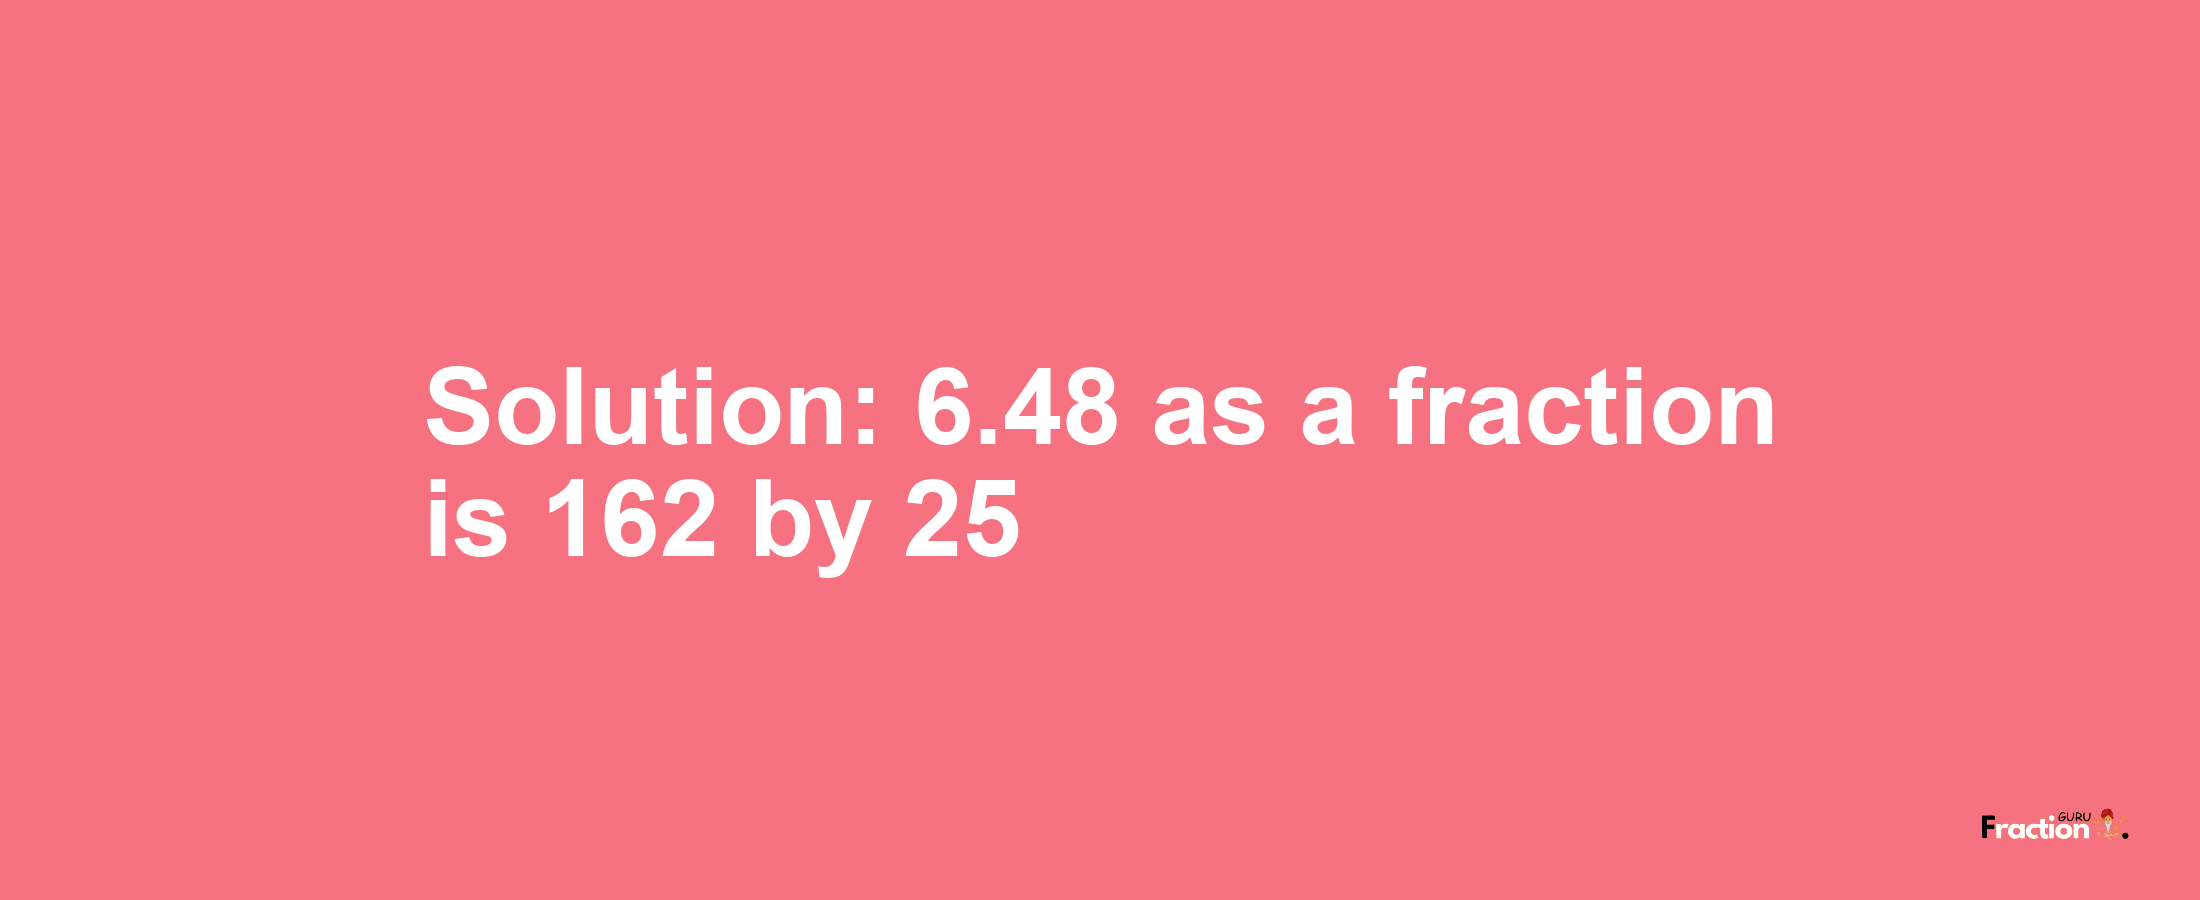 Solution:6.48 as a fraction is 162/25